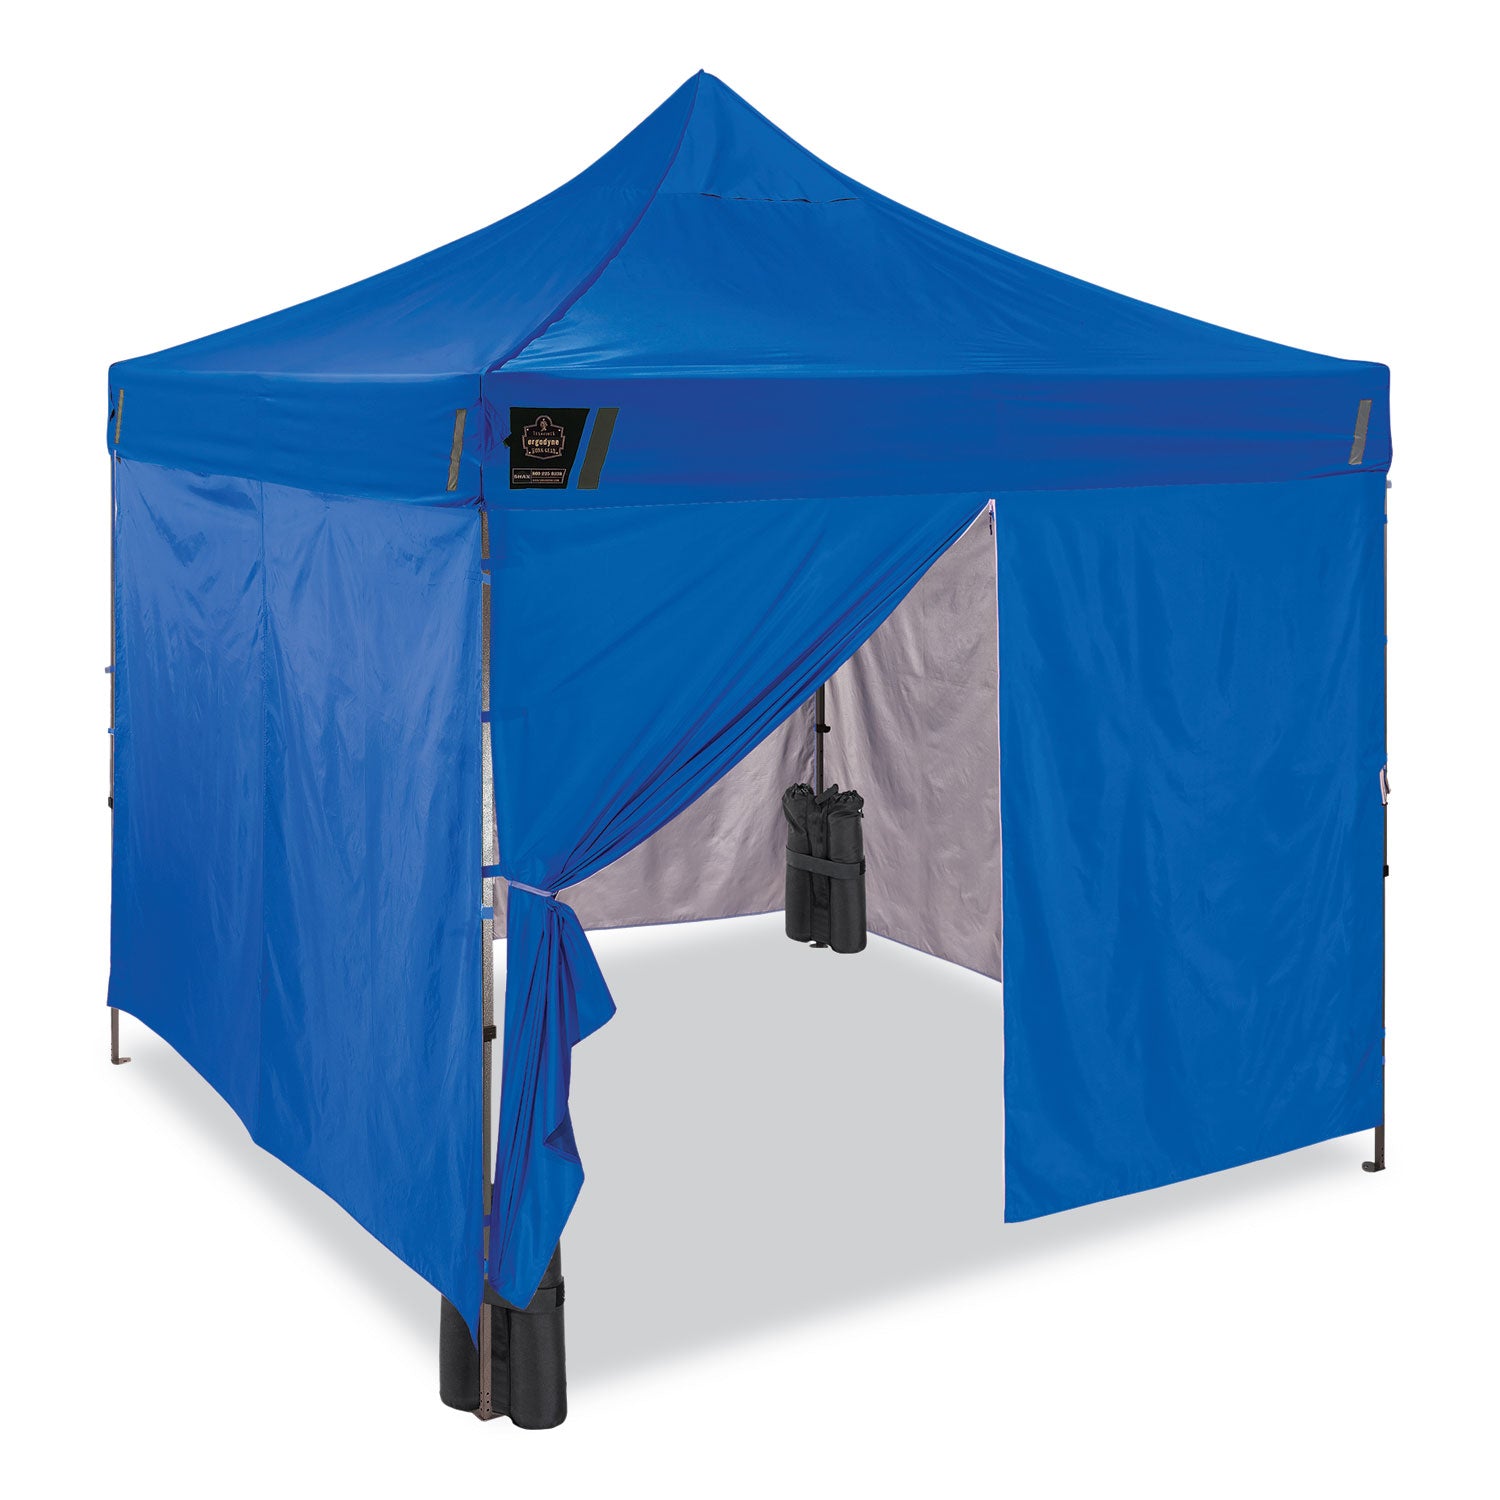 shax-6053-enclosed-pop-up-tent-kit-single-skin-10-ft-x-10-ft-polyester-steel-blue-ships-in-1-3-business-days_ego12977 - 1